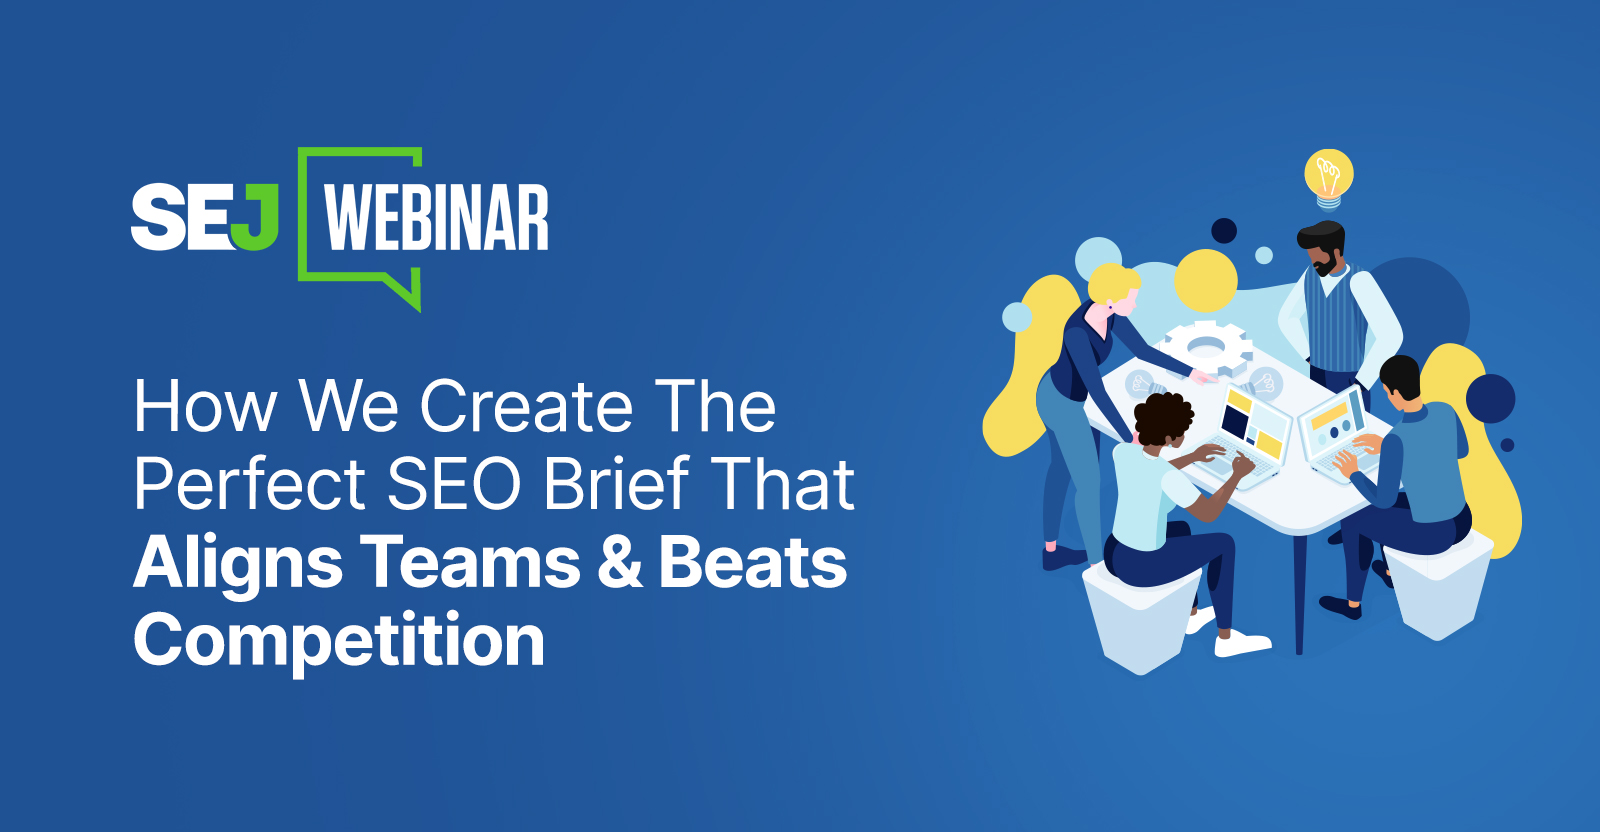 How We Create The Perfect SEO Brief That Aligns Teams & Beats Competition via @sejournal, @hethr_campbell